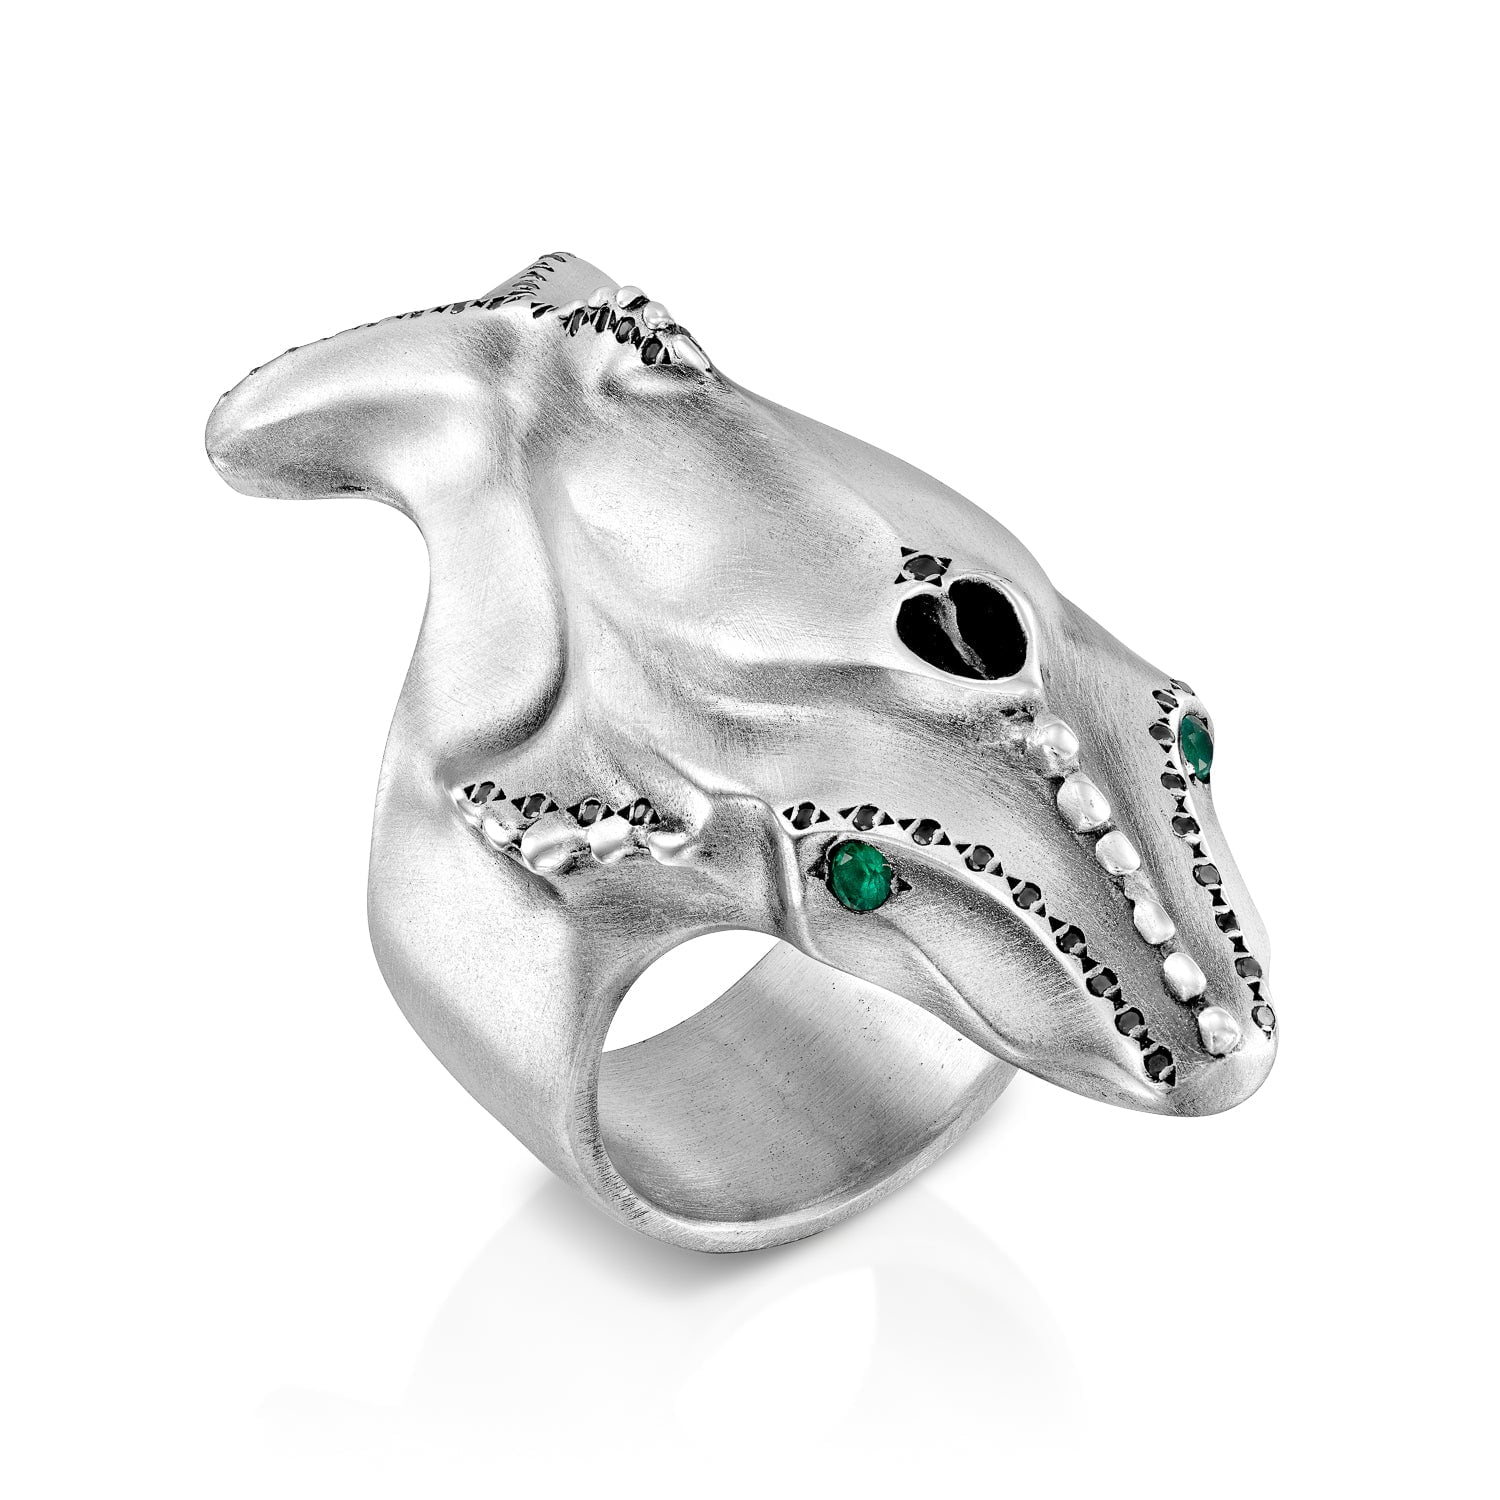 ELINA GLEIZER Rings Baroque Whale Ring with Green and Black setting